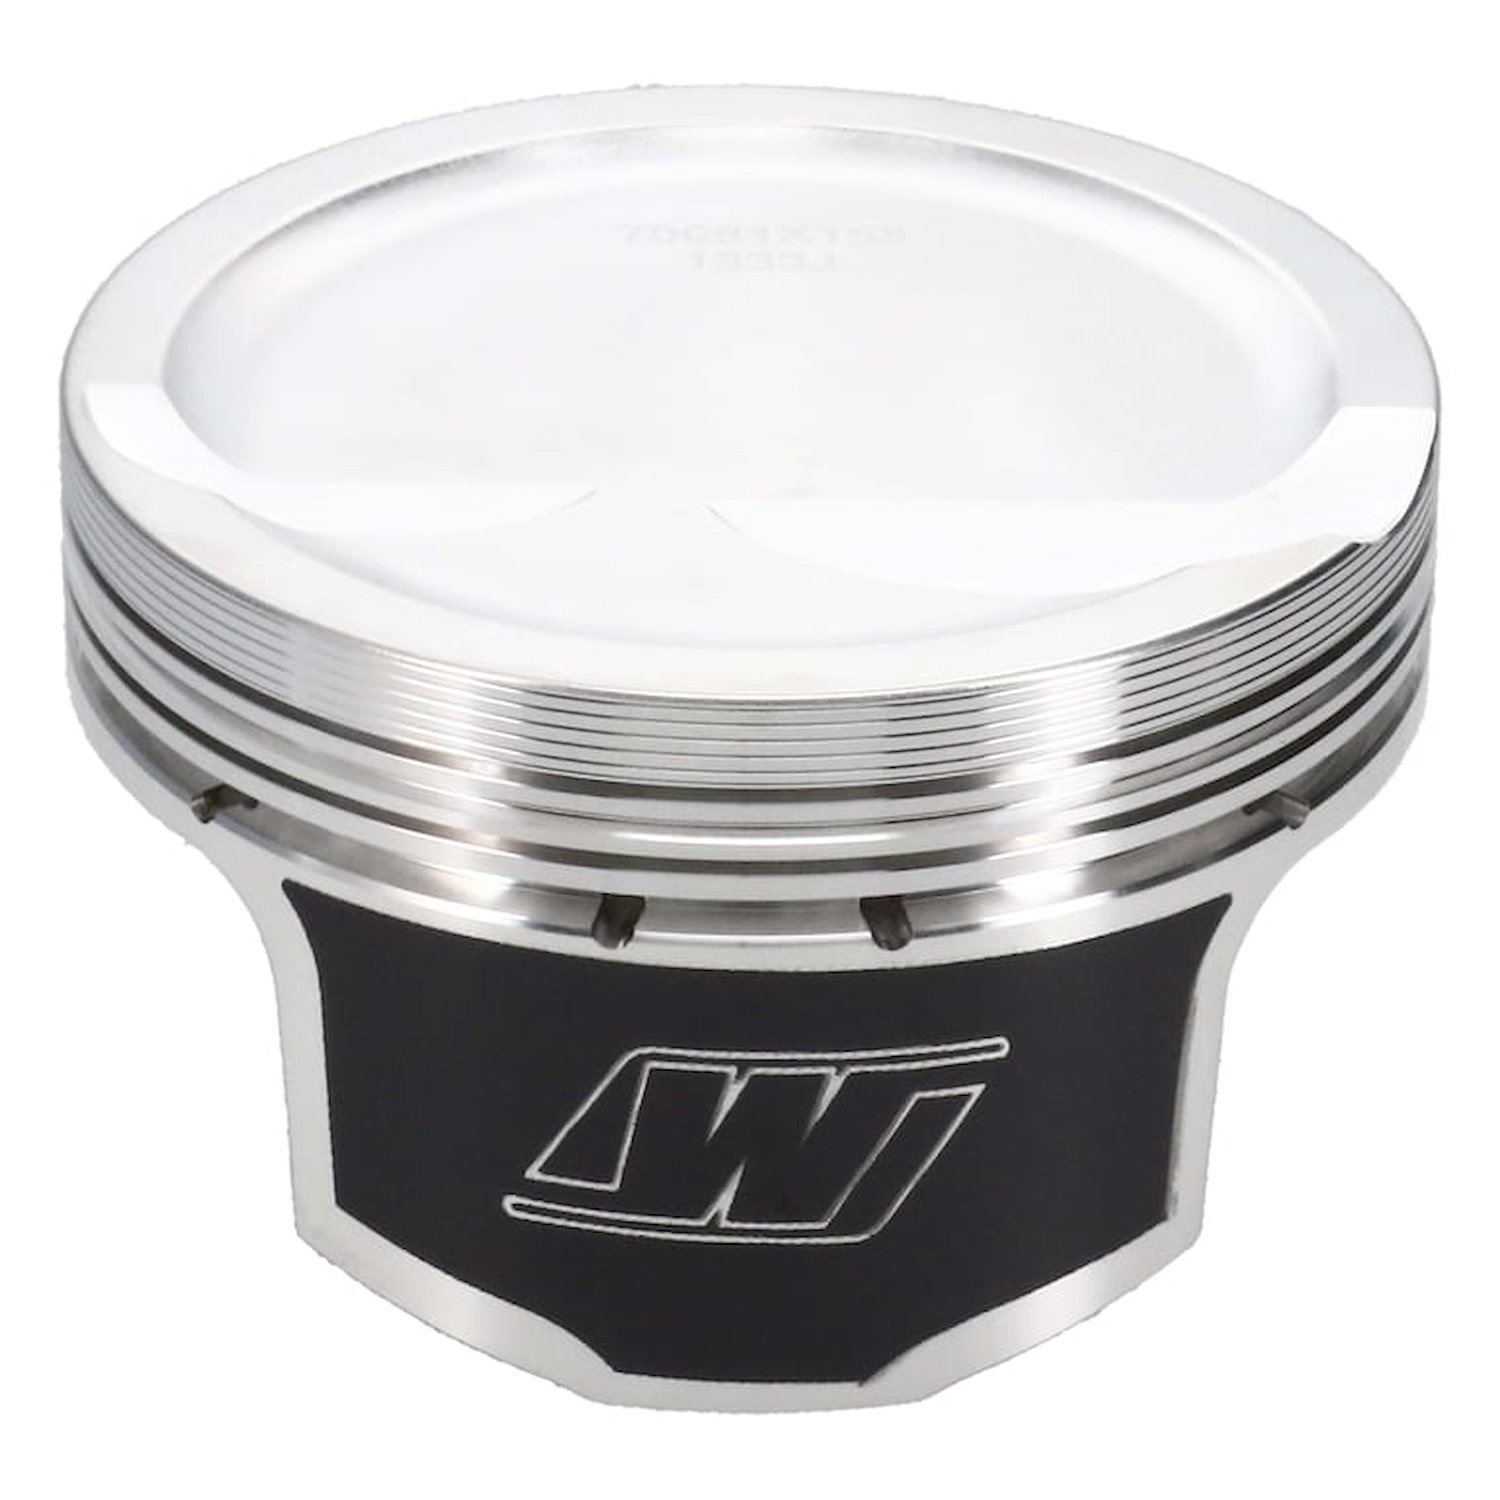 RED0081X155 RED-Series Piston Set, Chevy LS, 4.155 in. Bore, -15 cc Dish